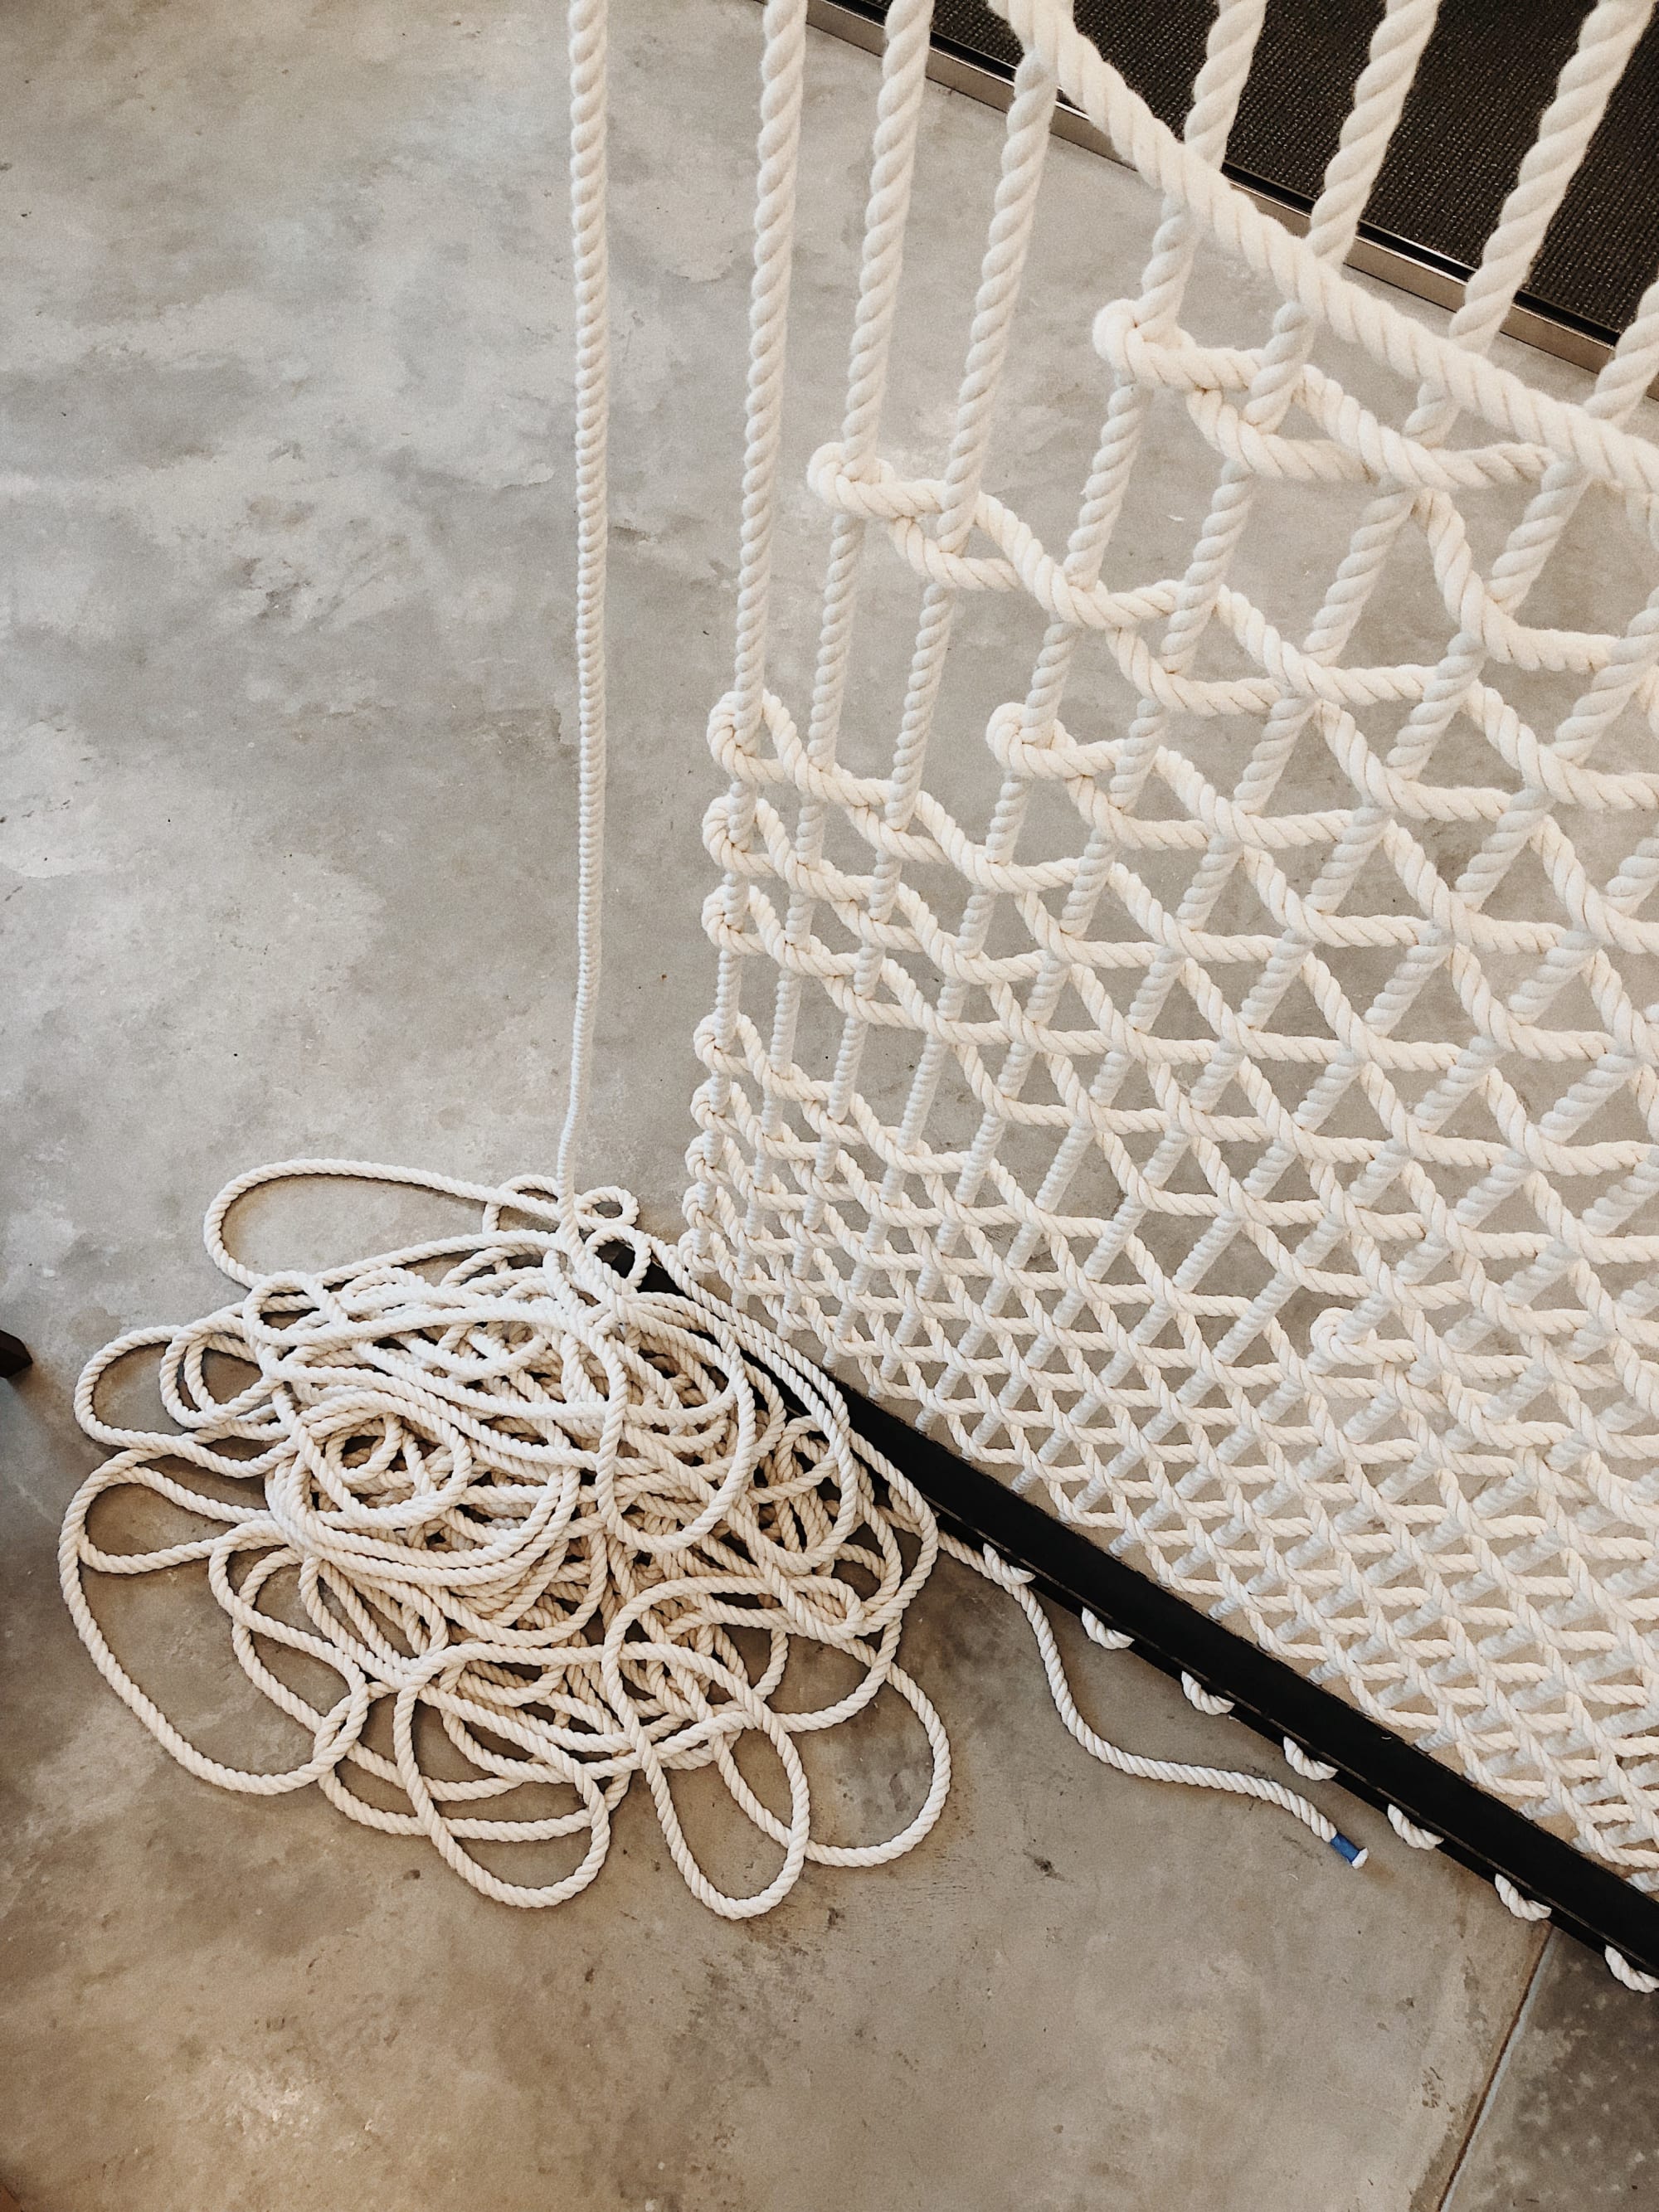 Woven Rope Screen by FIBROUS at IA